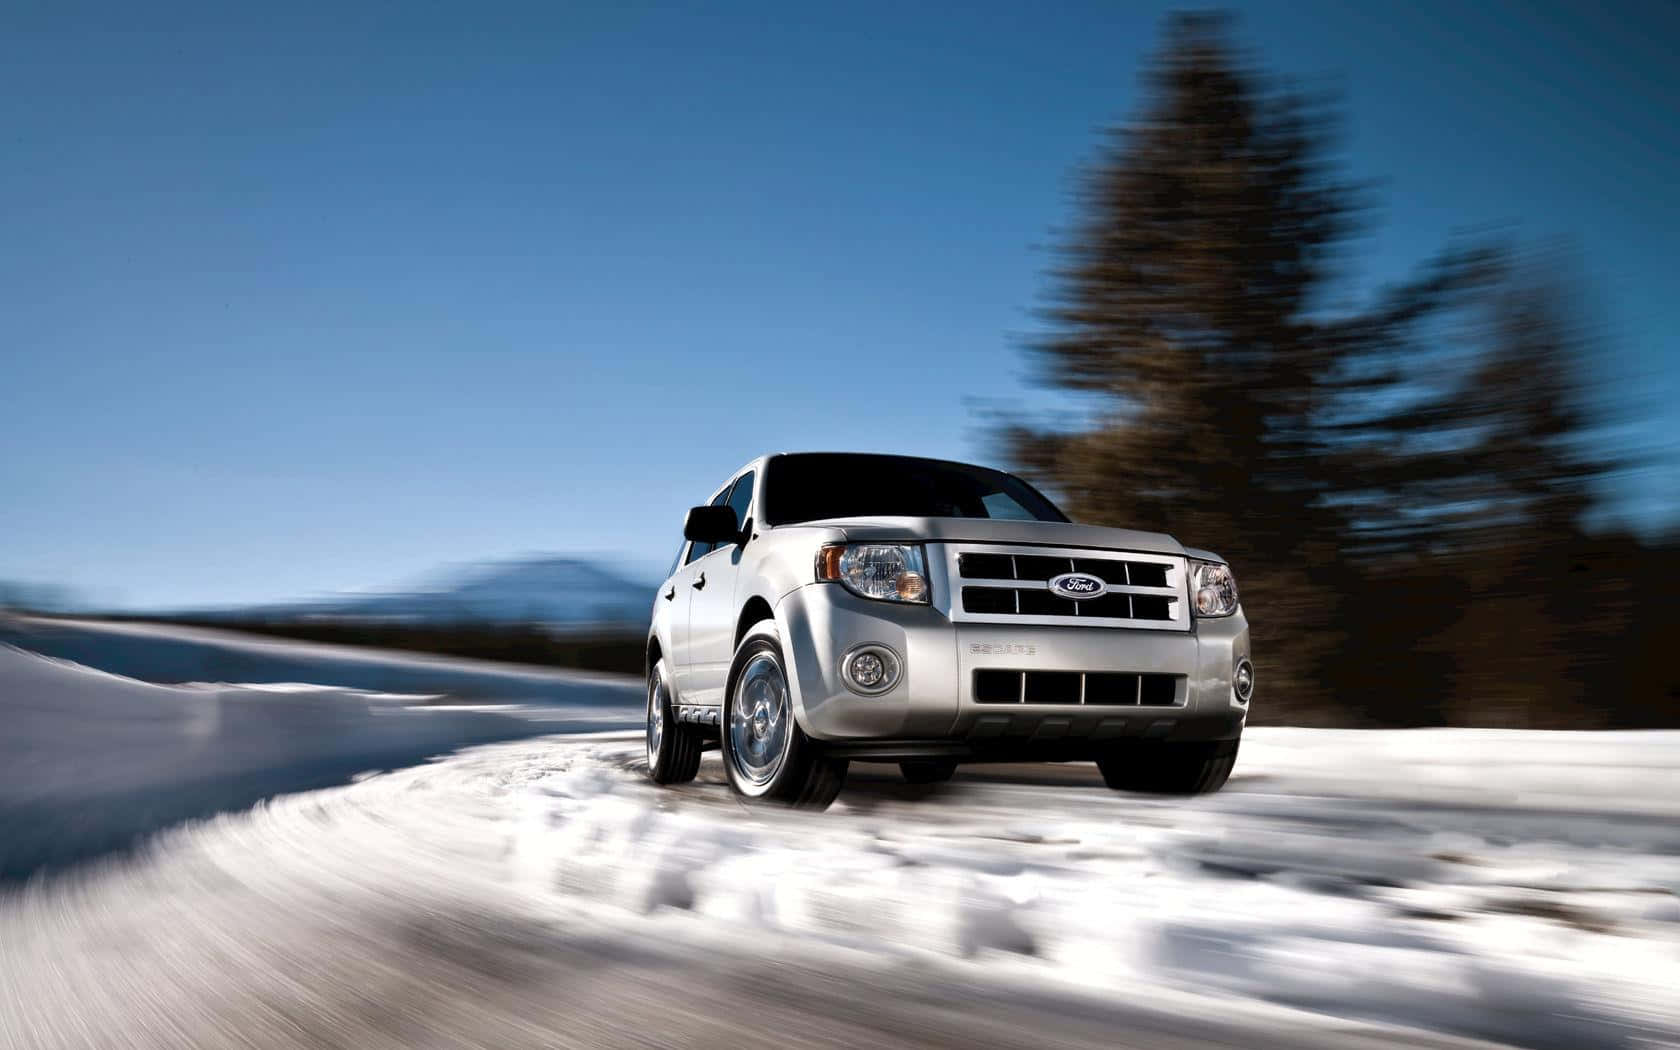 Caption: Sleek Ford Escape on Scenic Road Wallpaper